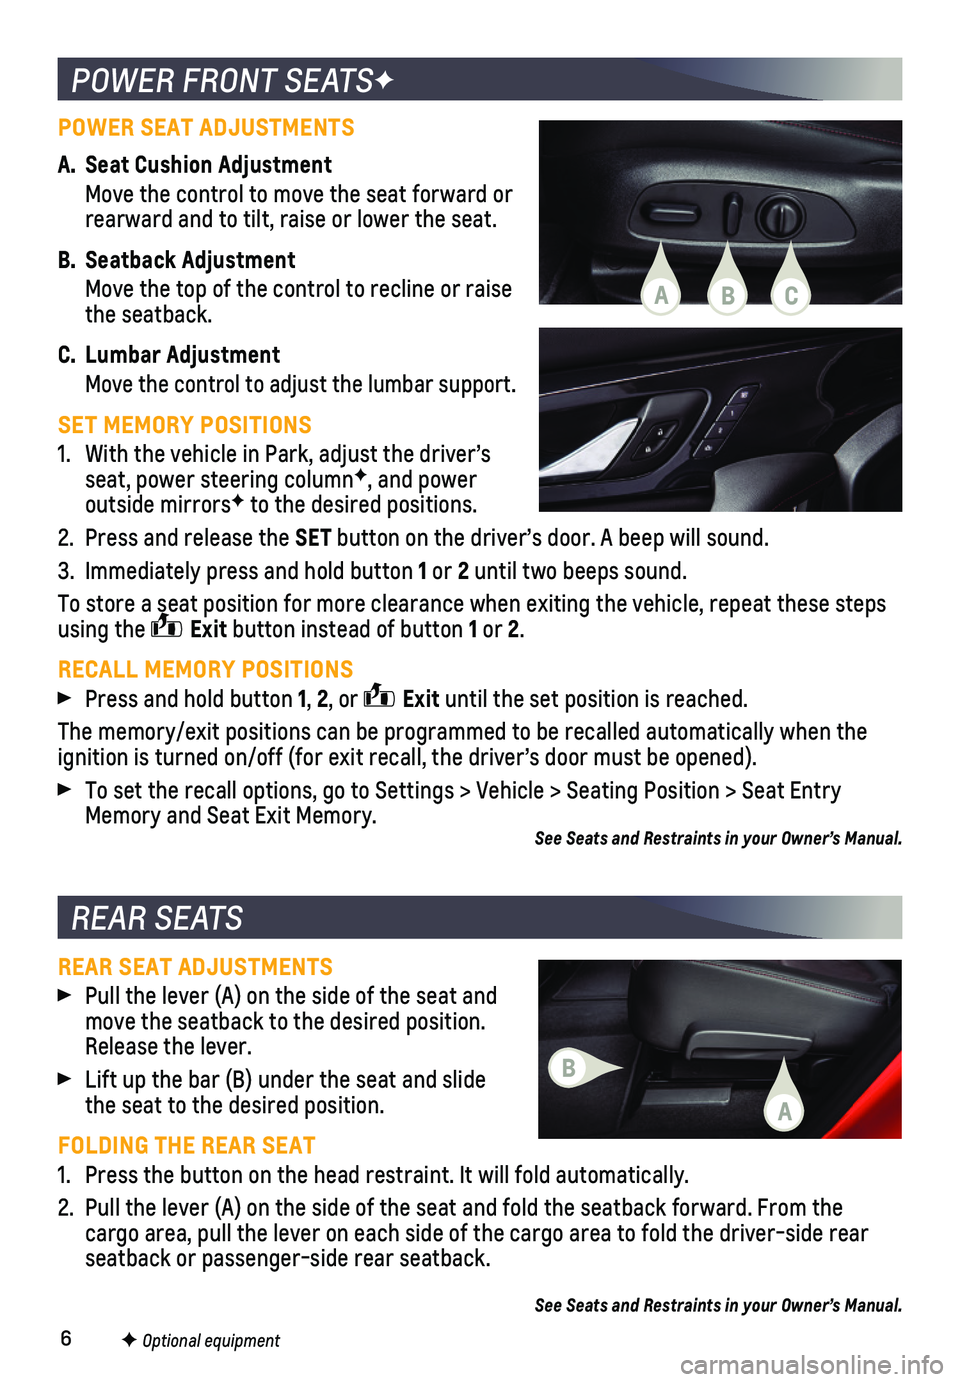 CHEVROLET BLAZER 2021  Get To Know Guide 6
POWER FRONT SEATSF
F Optional equipment
REAR SEATS
REAR SEAT ADJUSTMENTS
 Pull the lever (A) on the side of the seat and move the seatback to the desired position. Release the lever. 
 Lift up the b